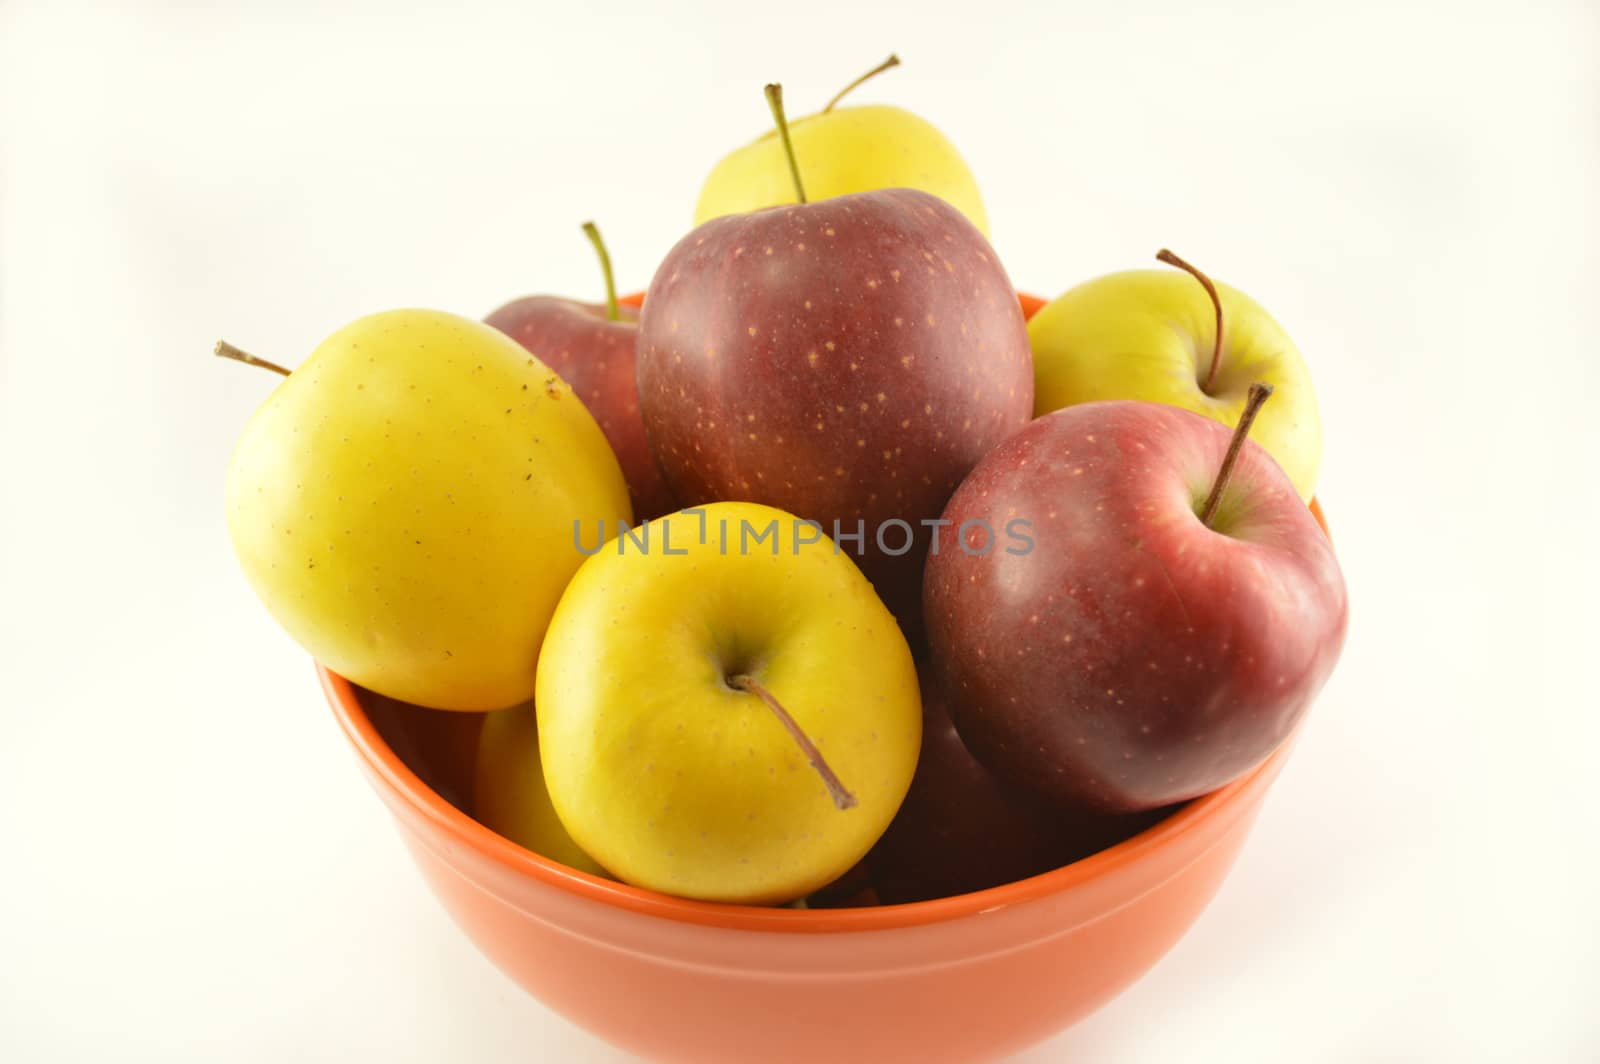 Red and white apple in an orange bowl